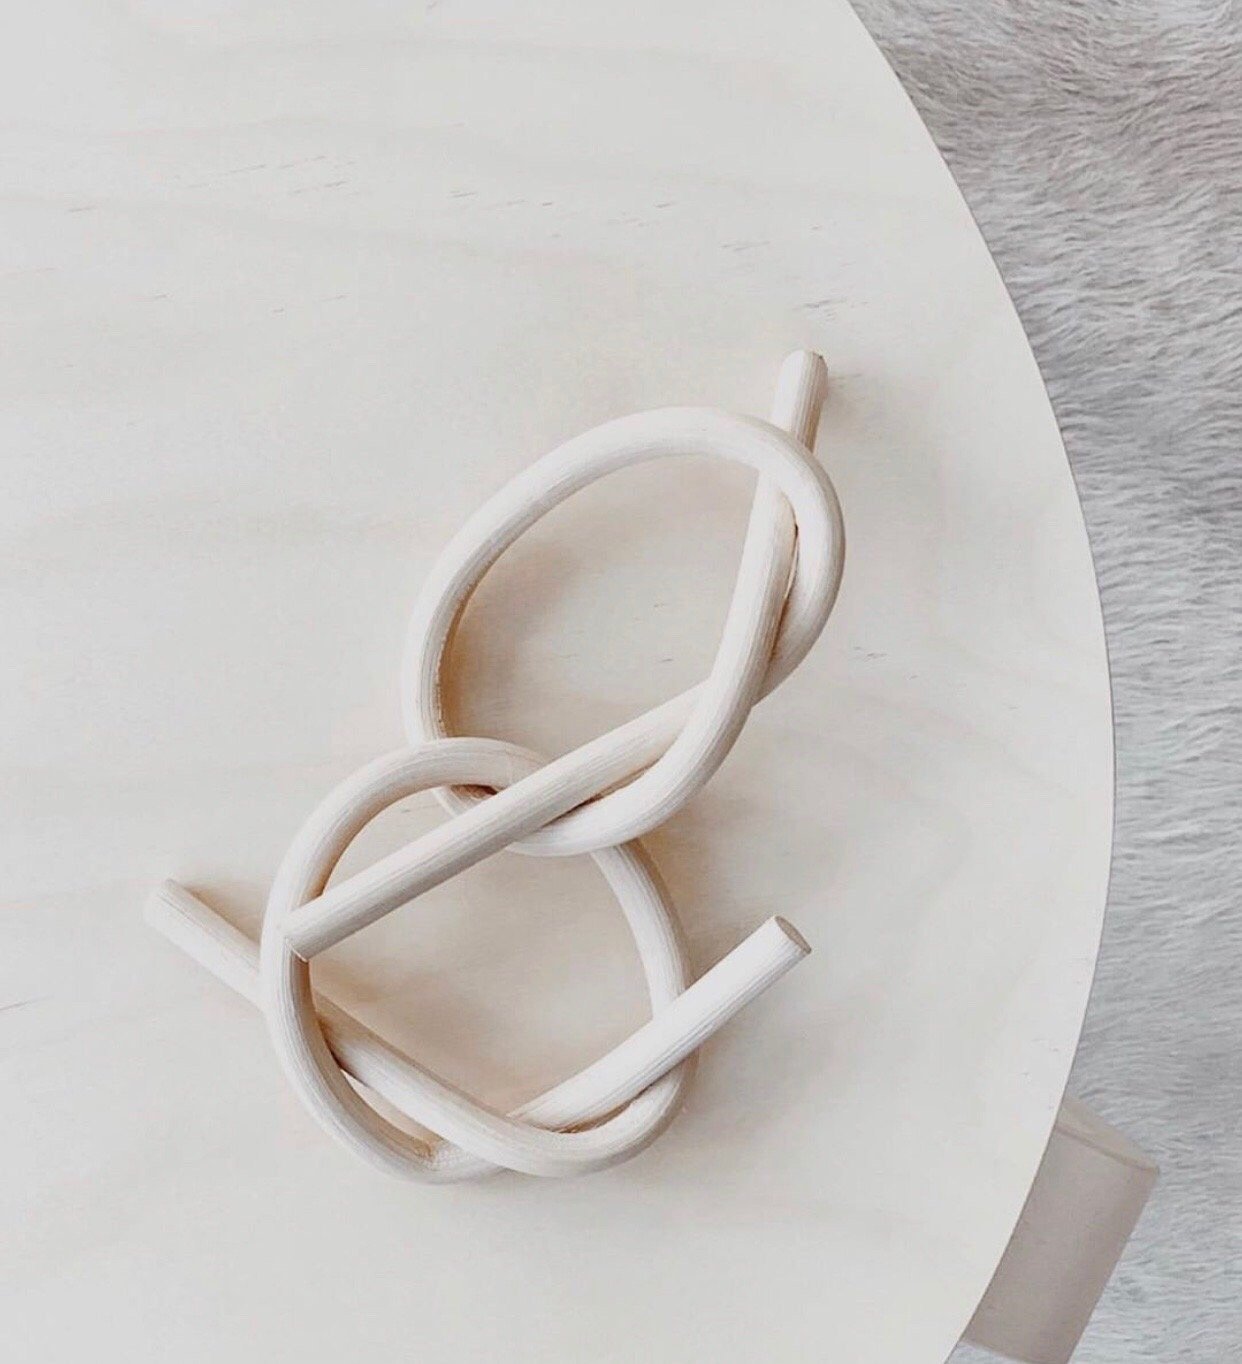 Table Knot - Katie Gong